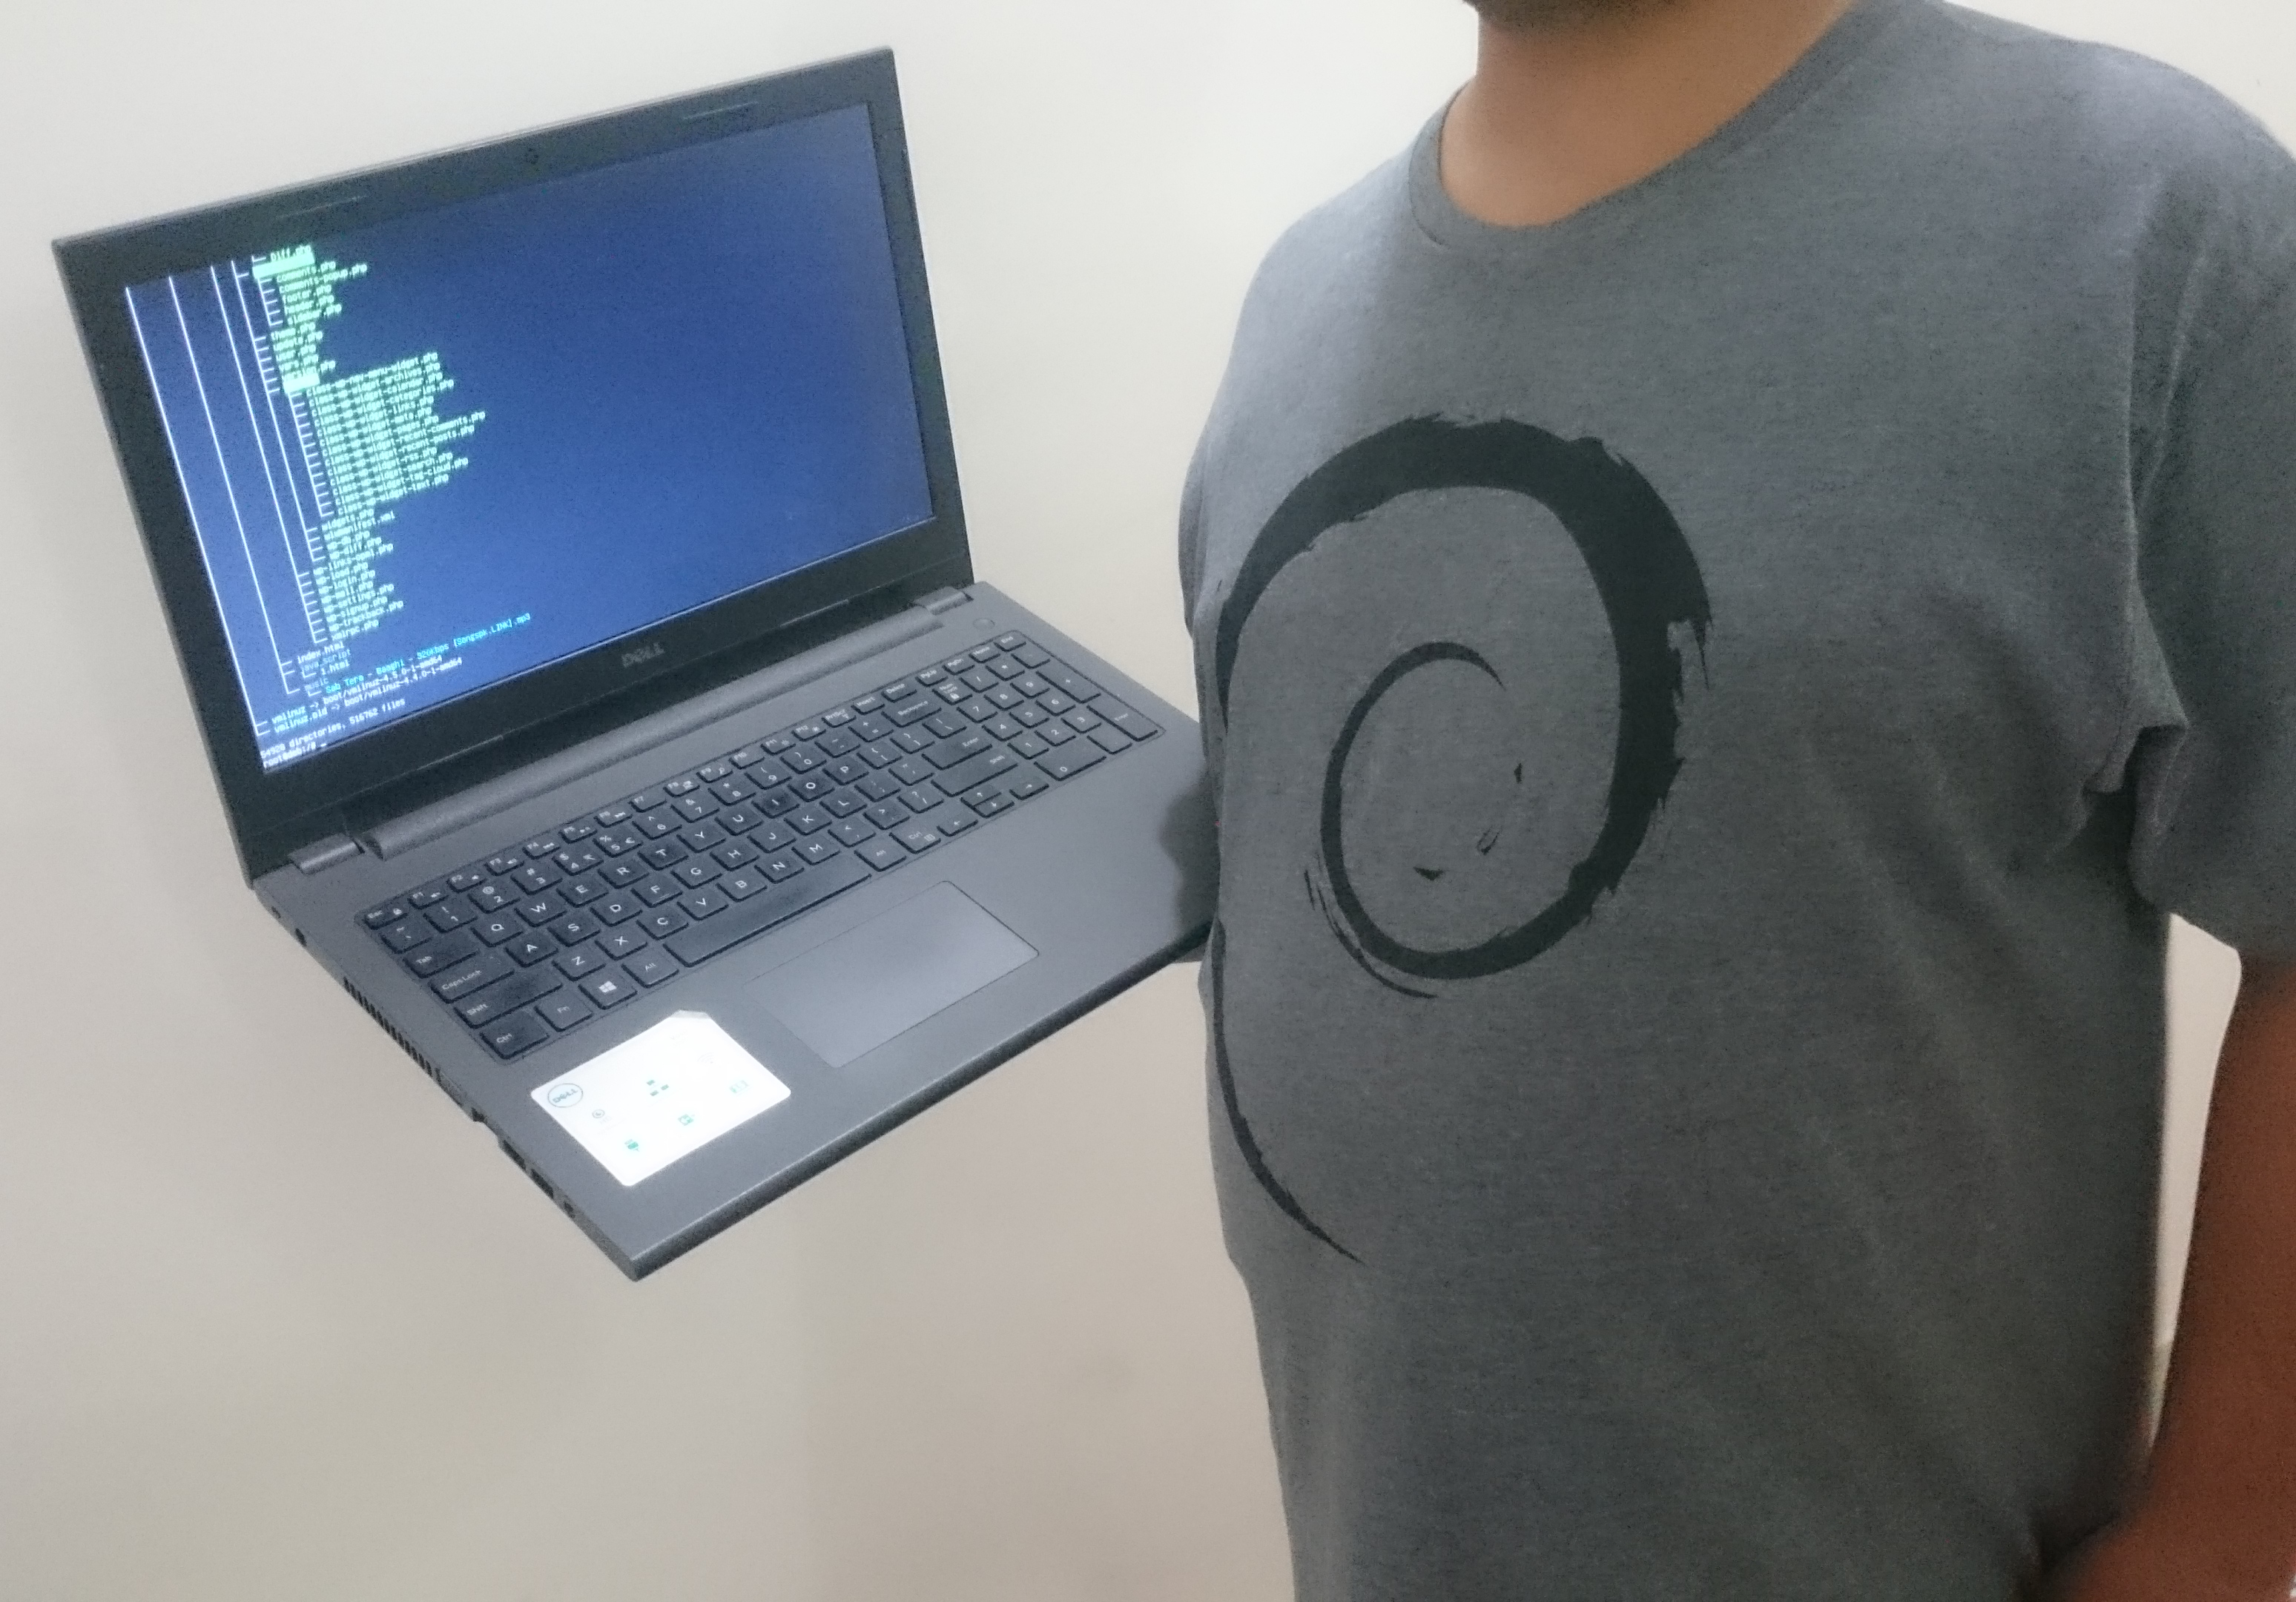 In Meeting - Taking to SYS Admins. The Debian Logo on my T-Shirt makes me Perfect.